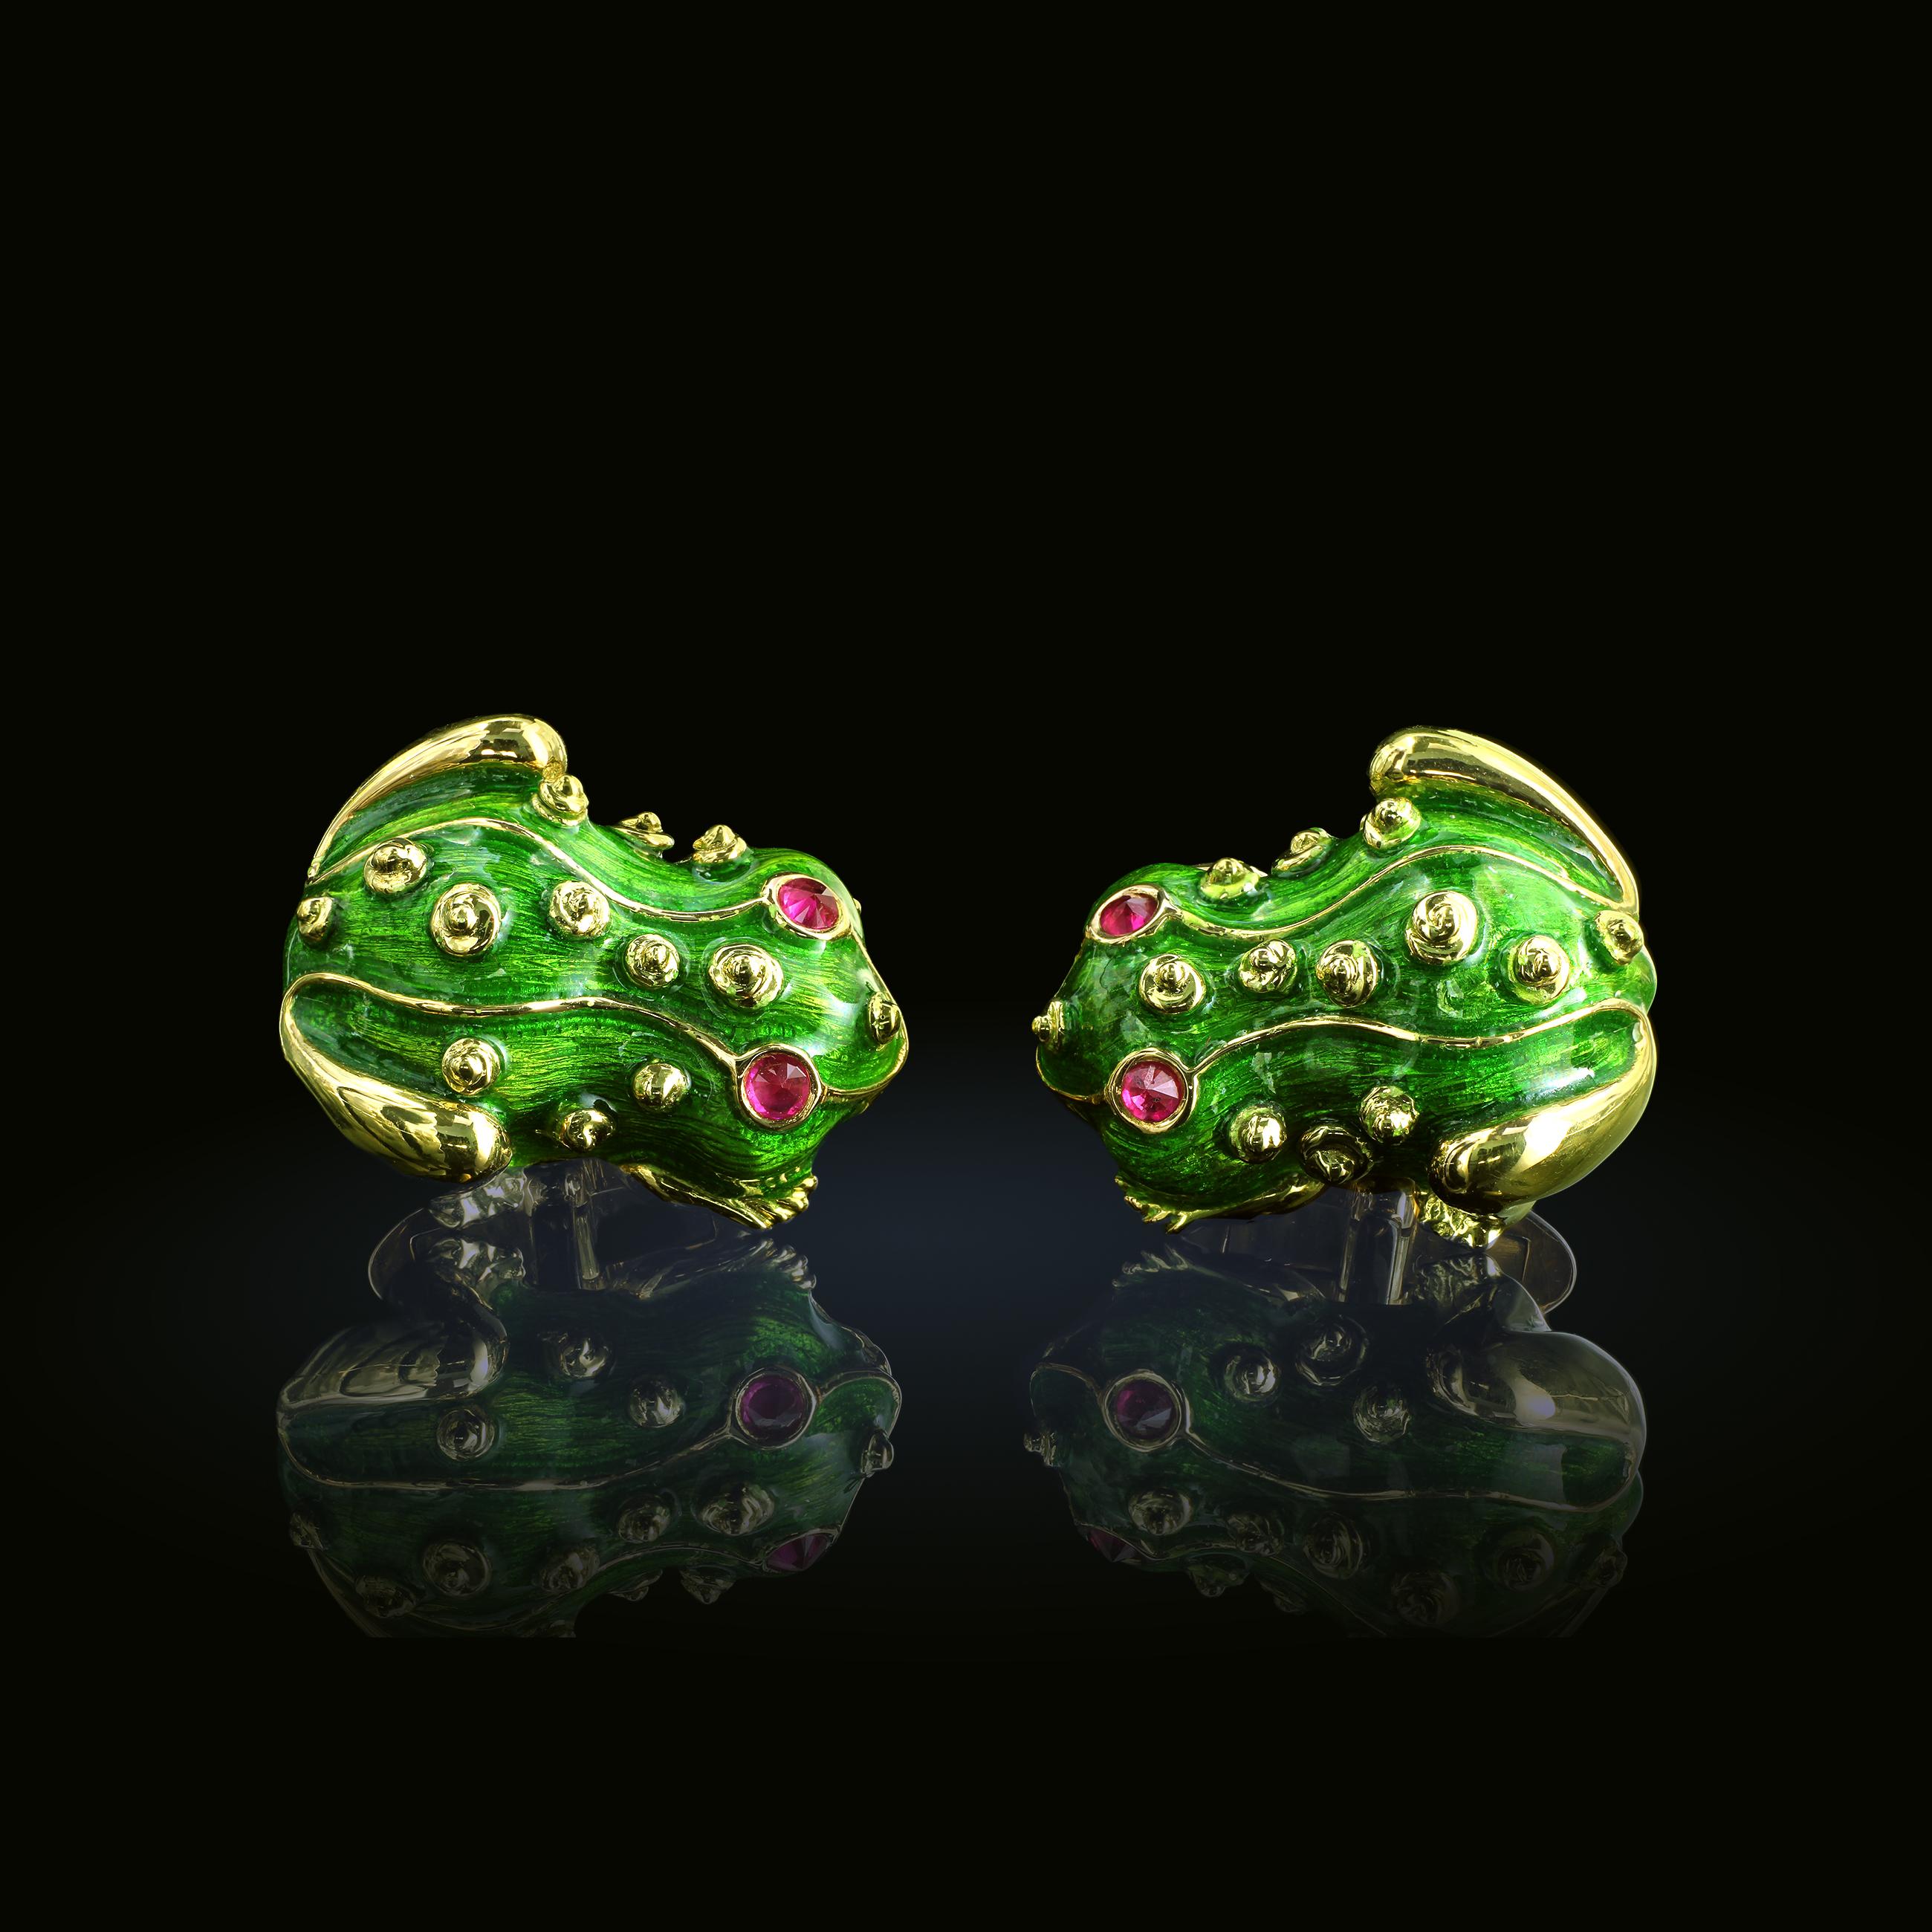 Round Cut Leon Mege Hand-Made 18K Gold Green Enamel Frog Cufflinks with Natural Ruby Eyes For Sale